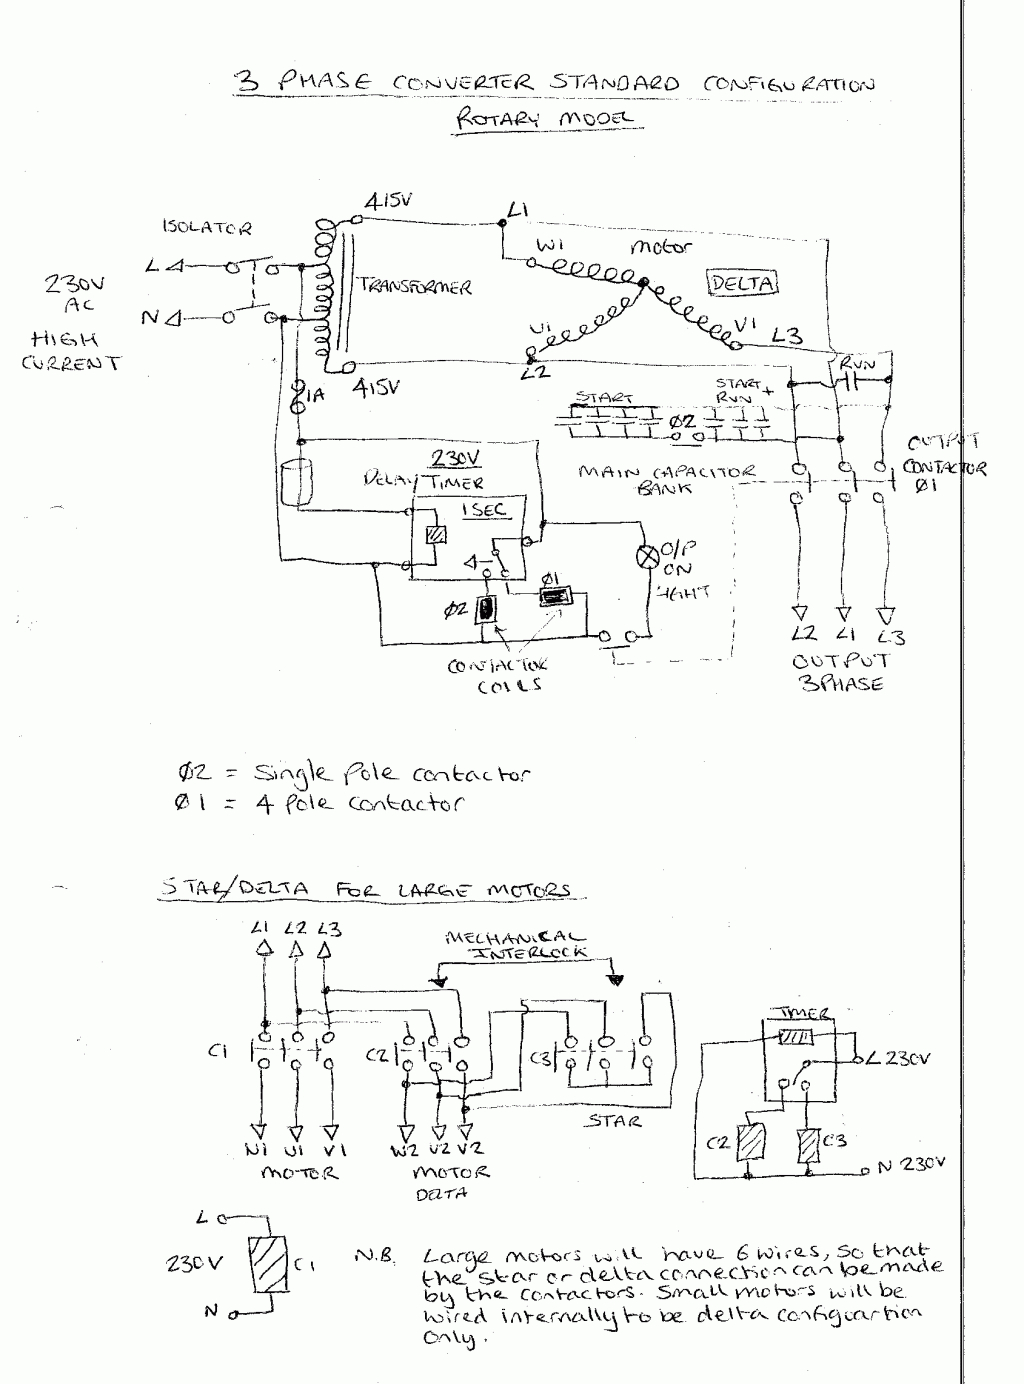 3 Phase Converter Wiring Diagrams Hobart Meat - cargoeagle